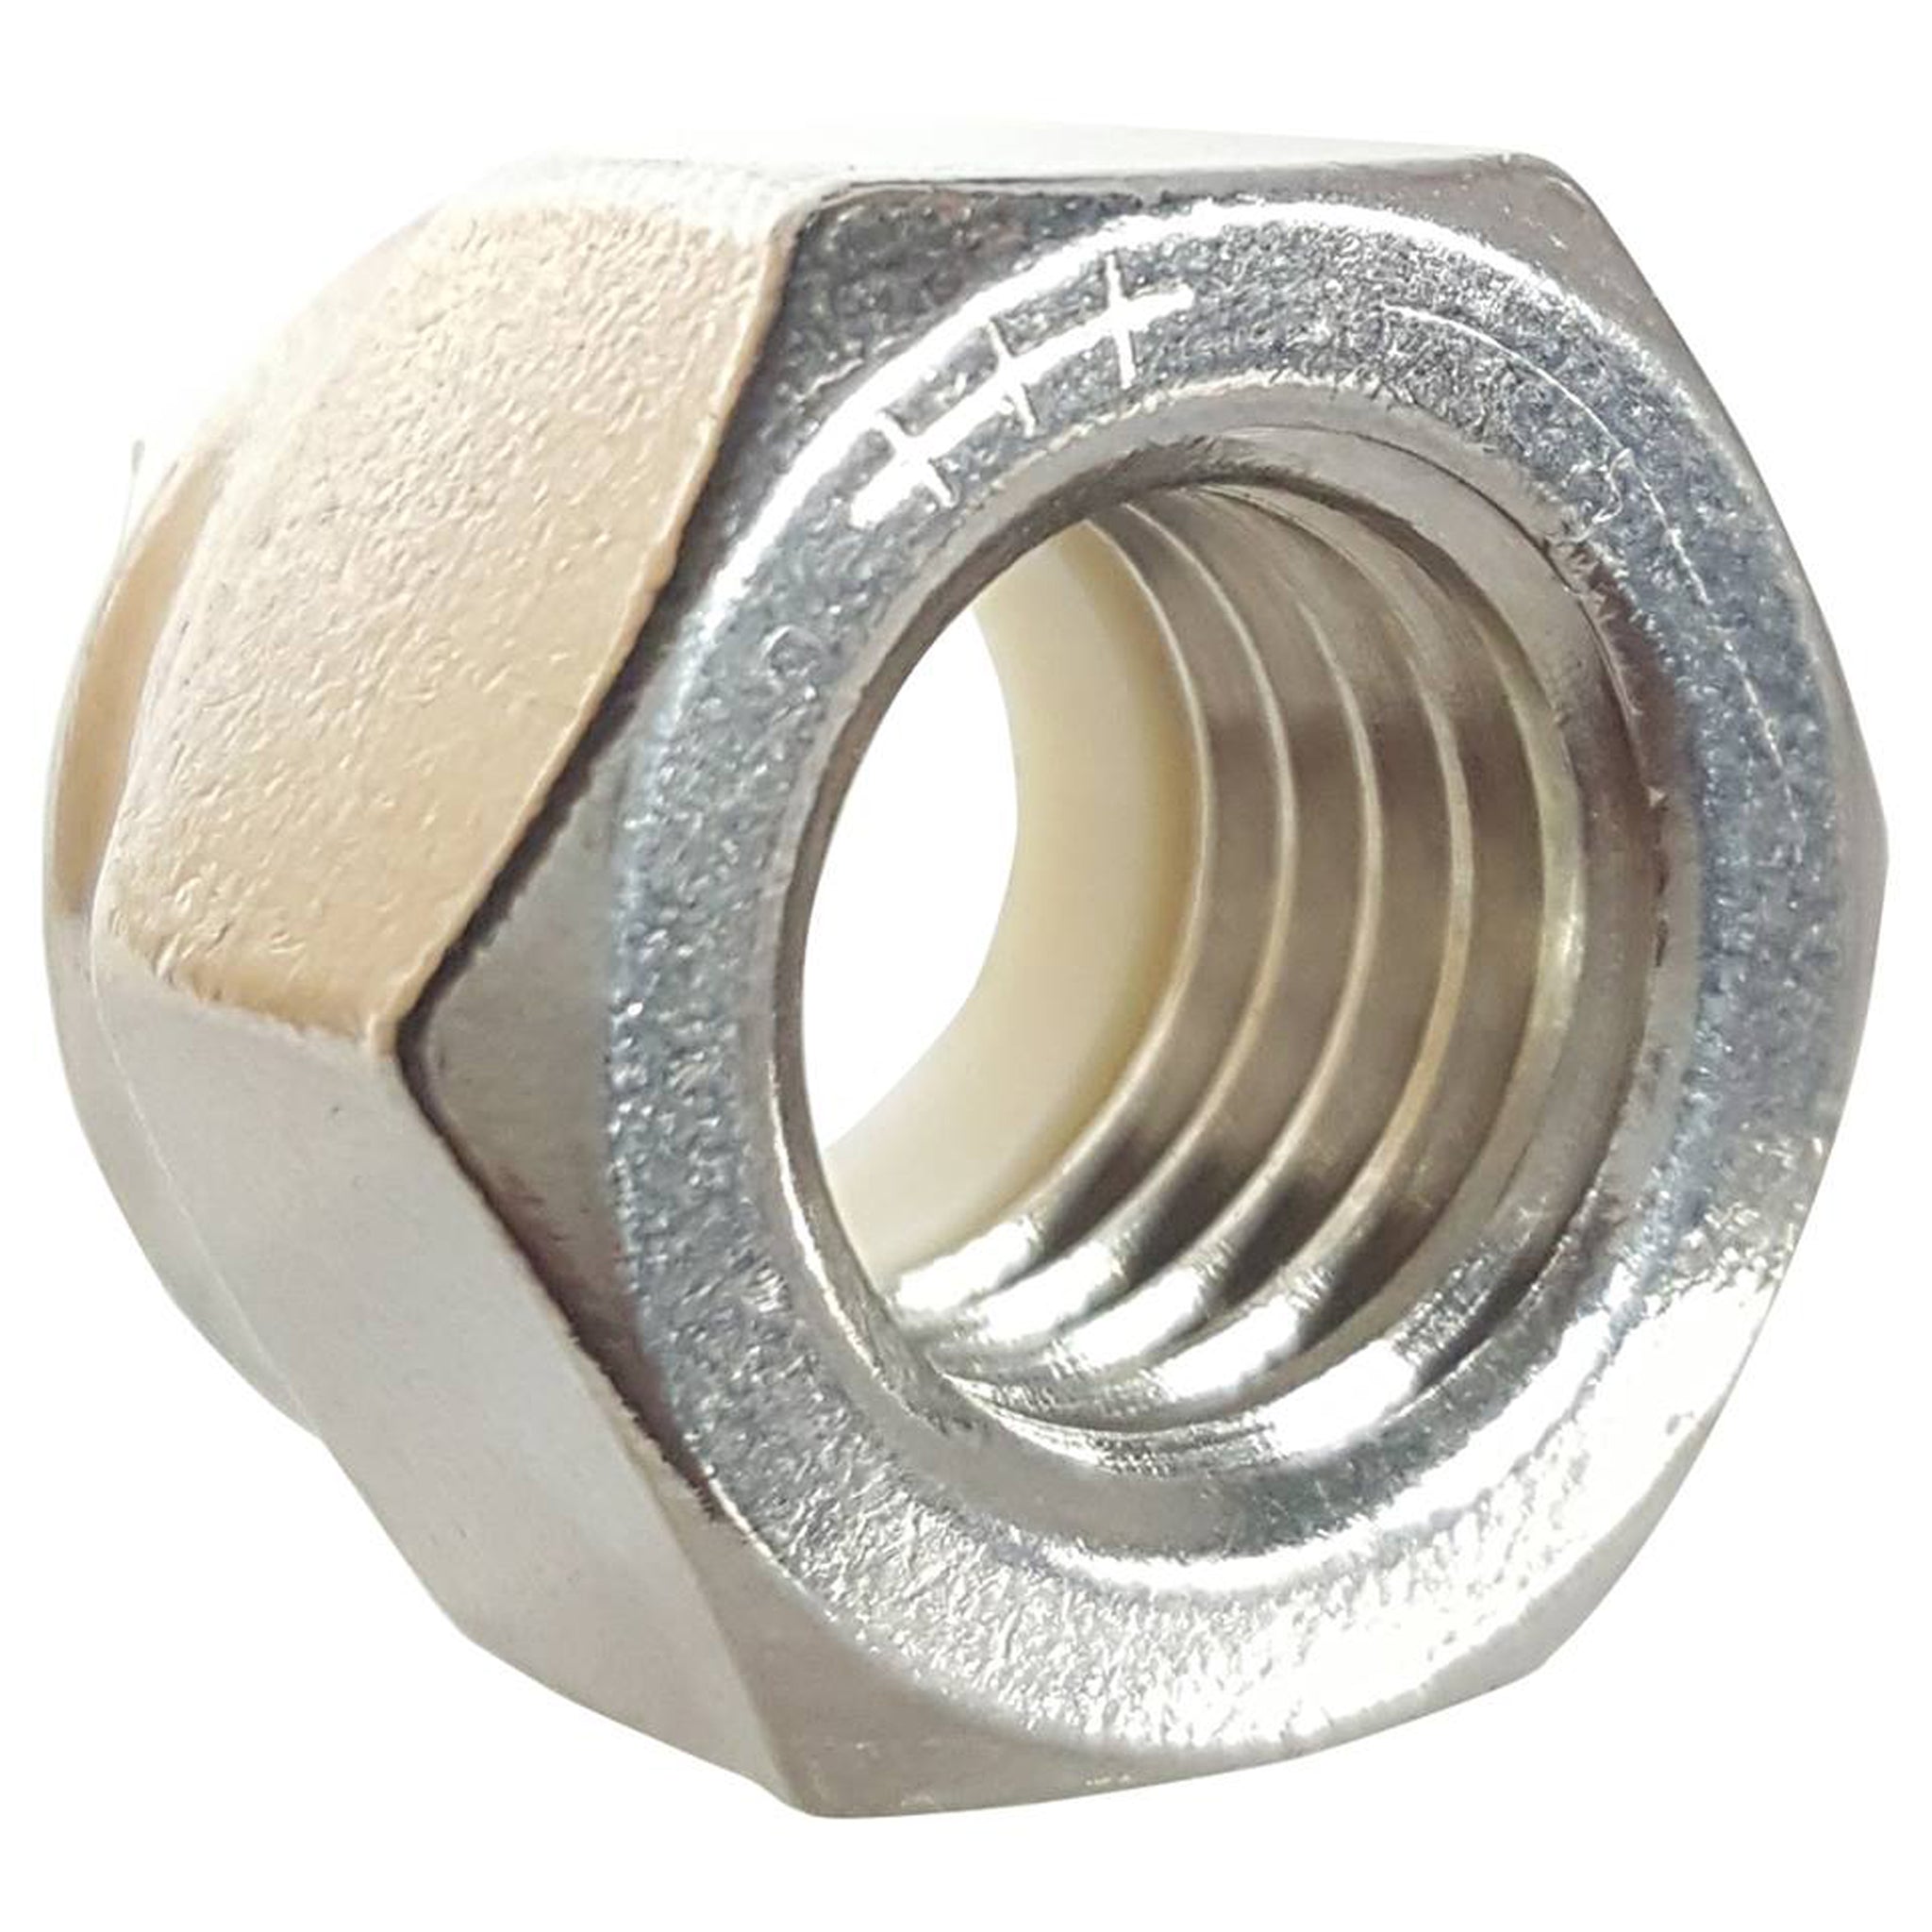 4-40 Nylon Lock Nuts Stainless Steel 18-8 Qty 100 $6.38 ...